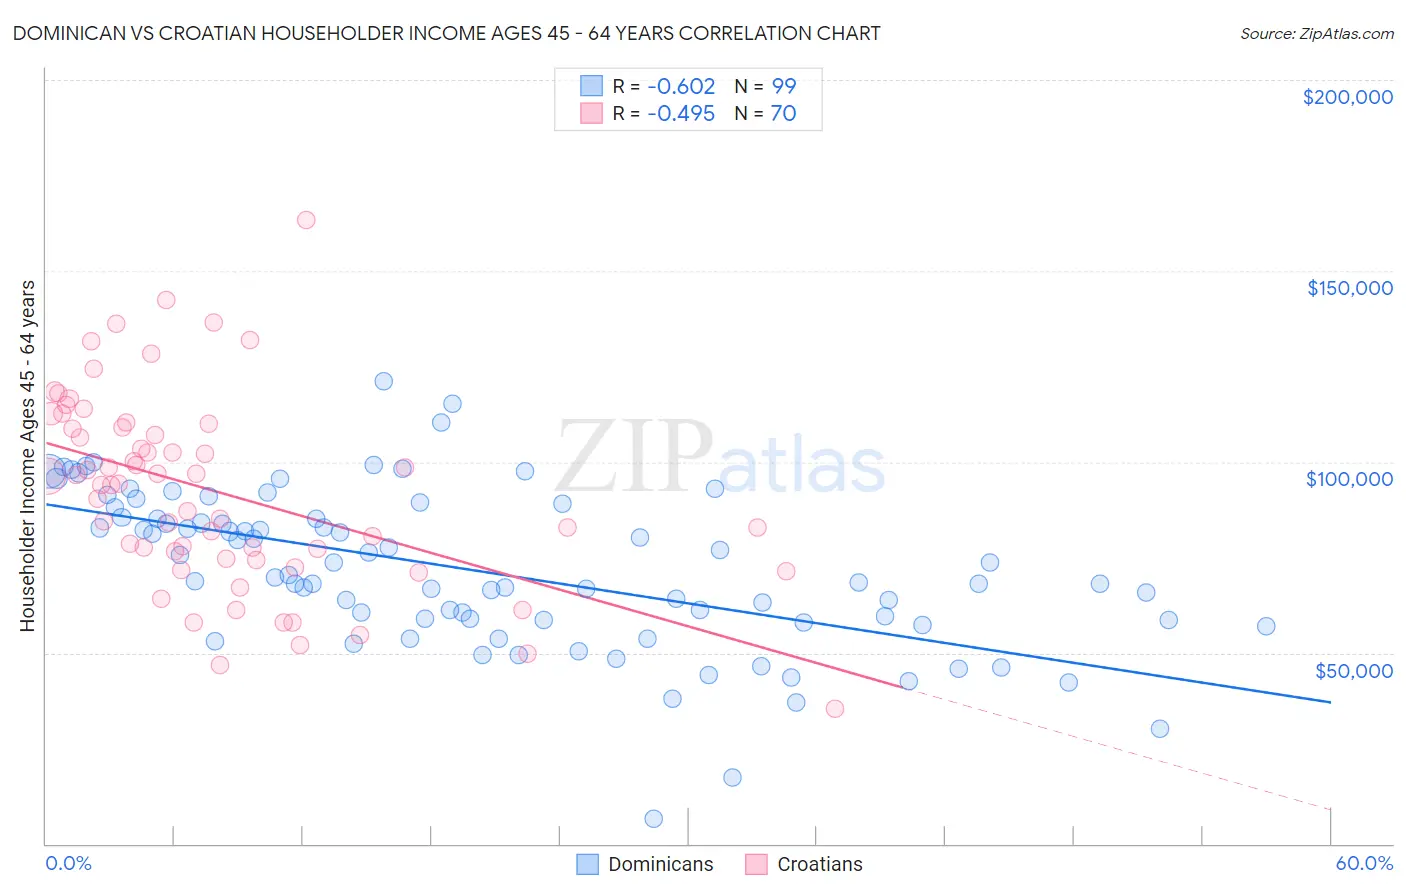 Dominican vs Croatian Householder Income Ages 45 - 64 years